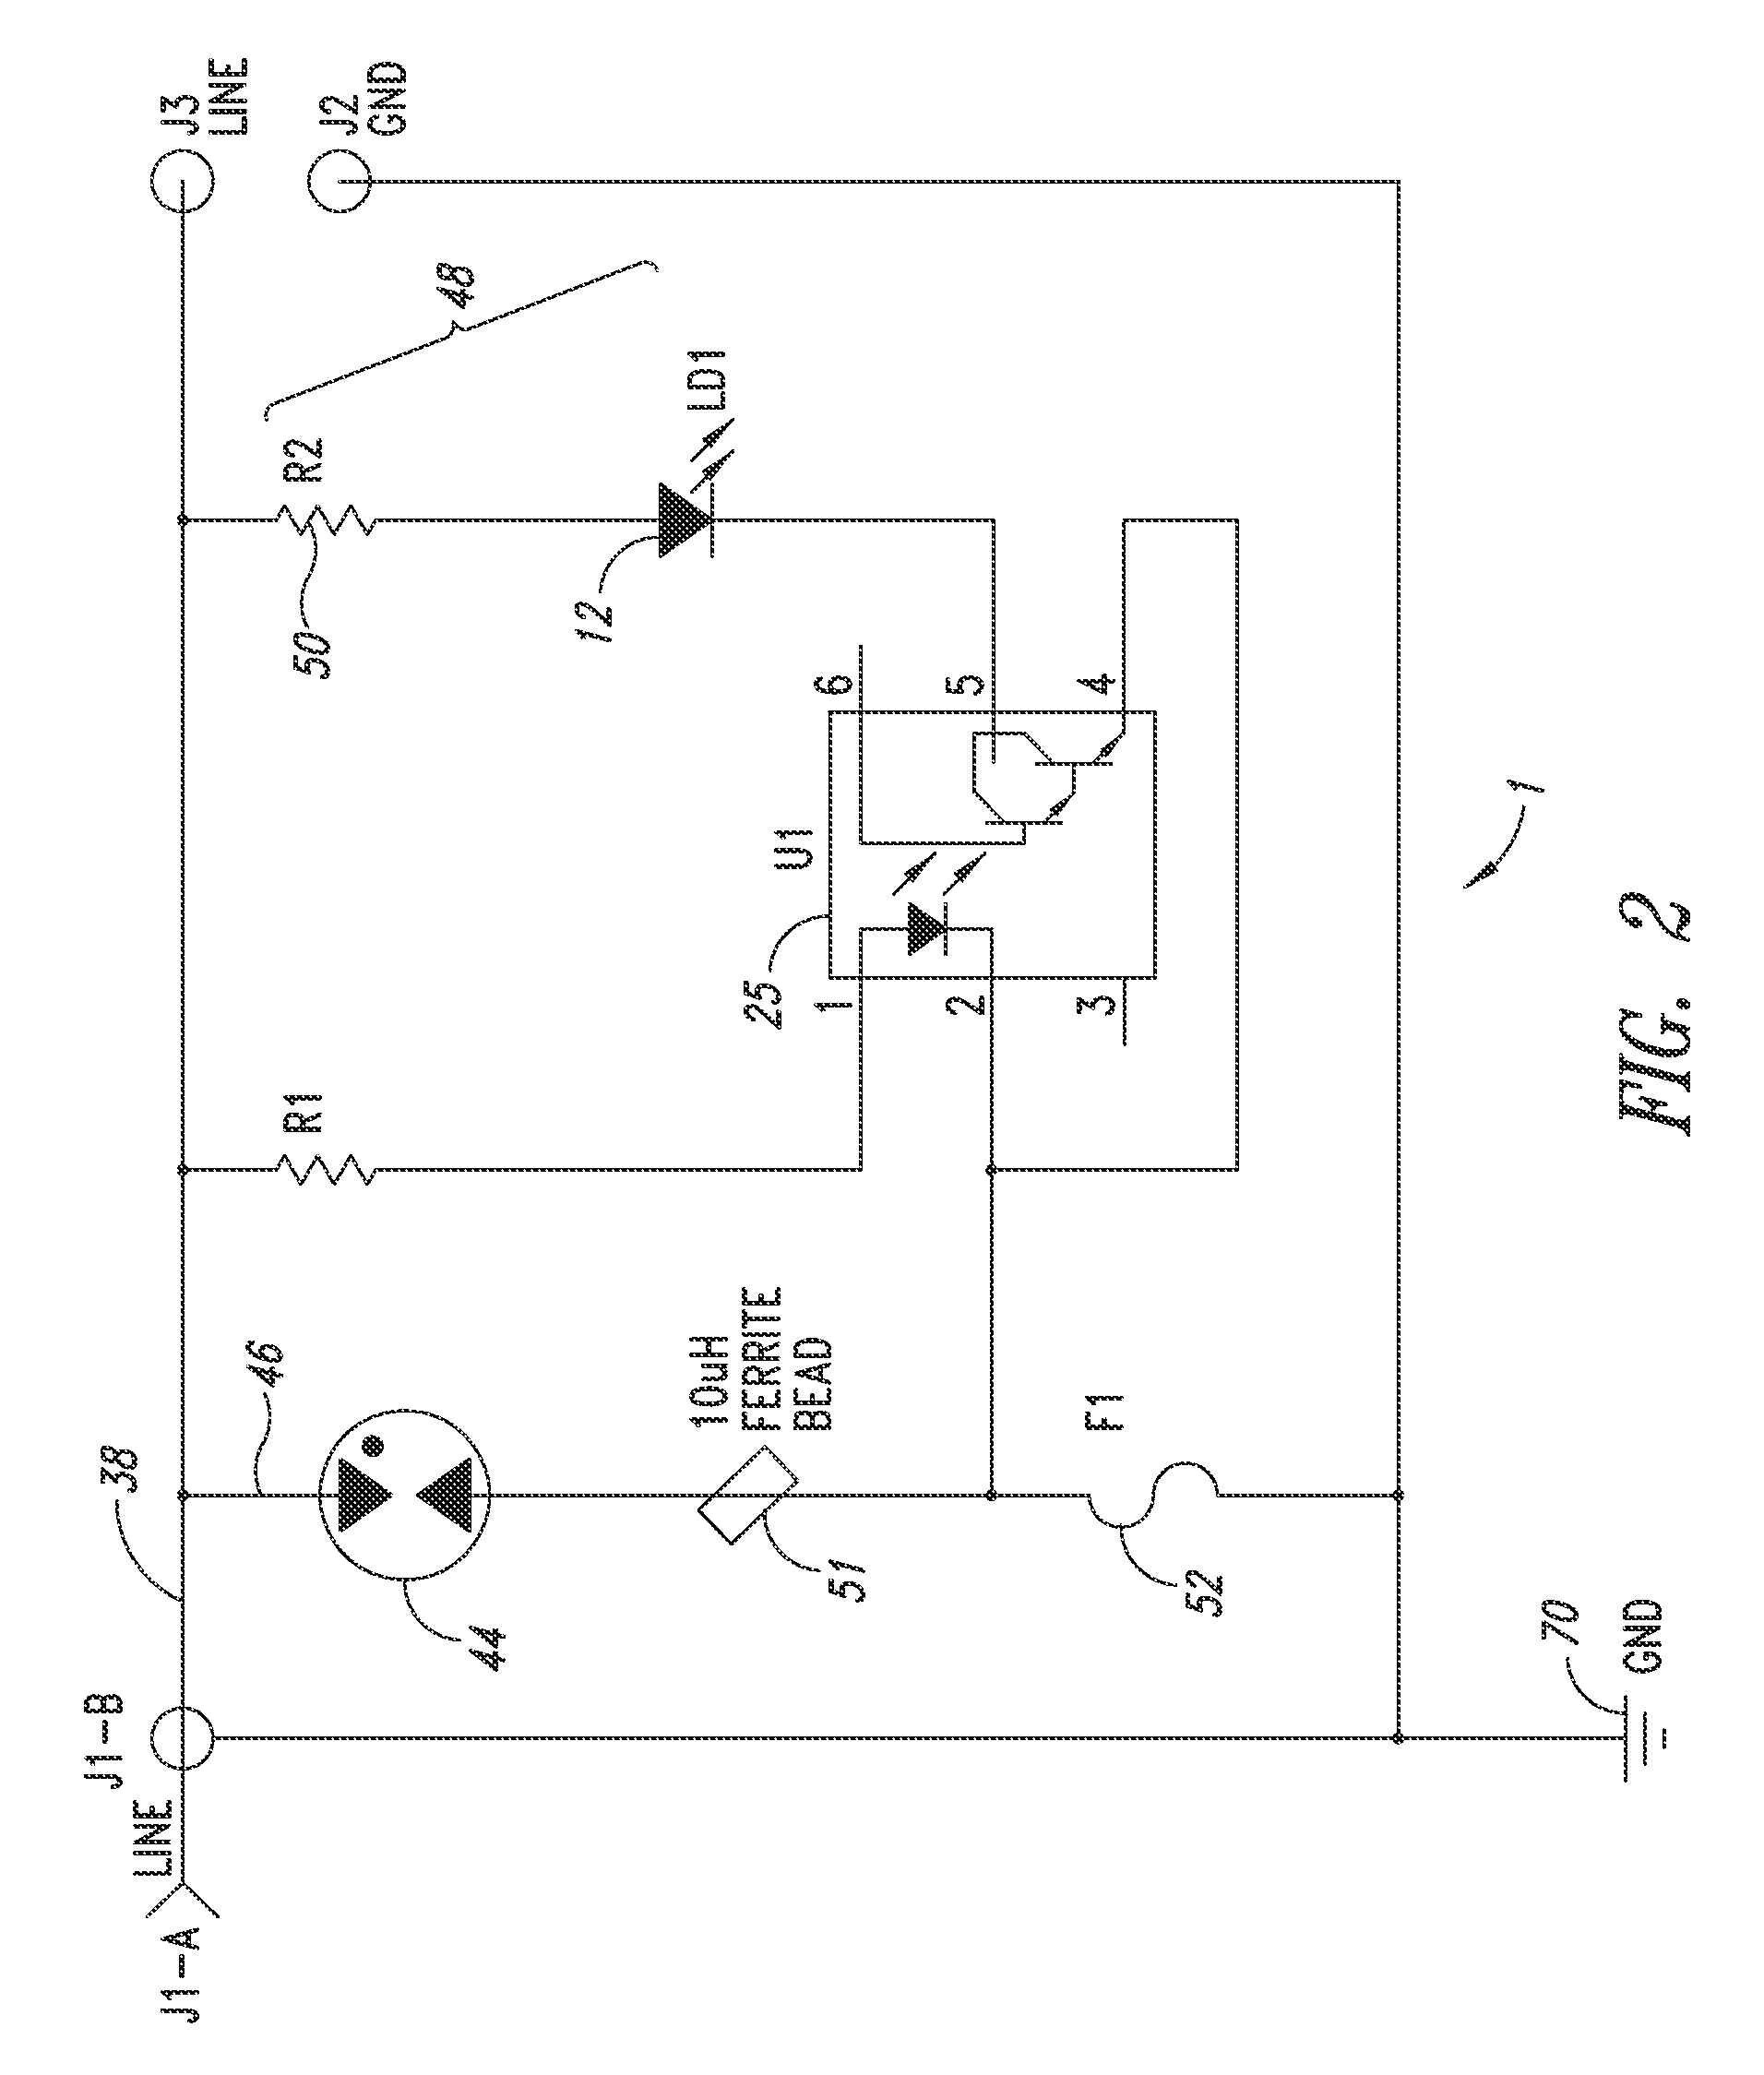 Surge protection device for coaxial cable with diagnostic capabilities